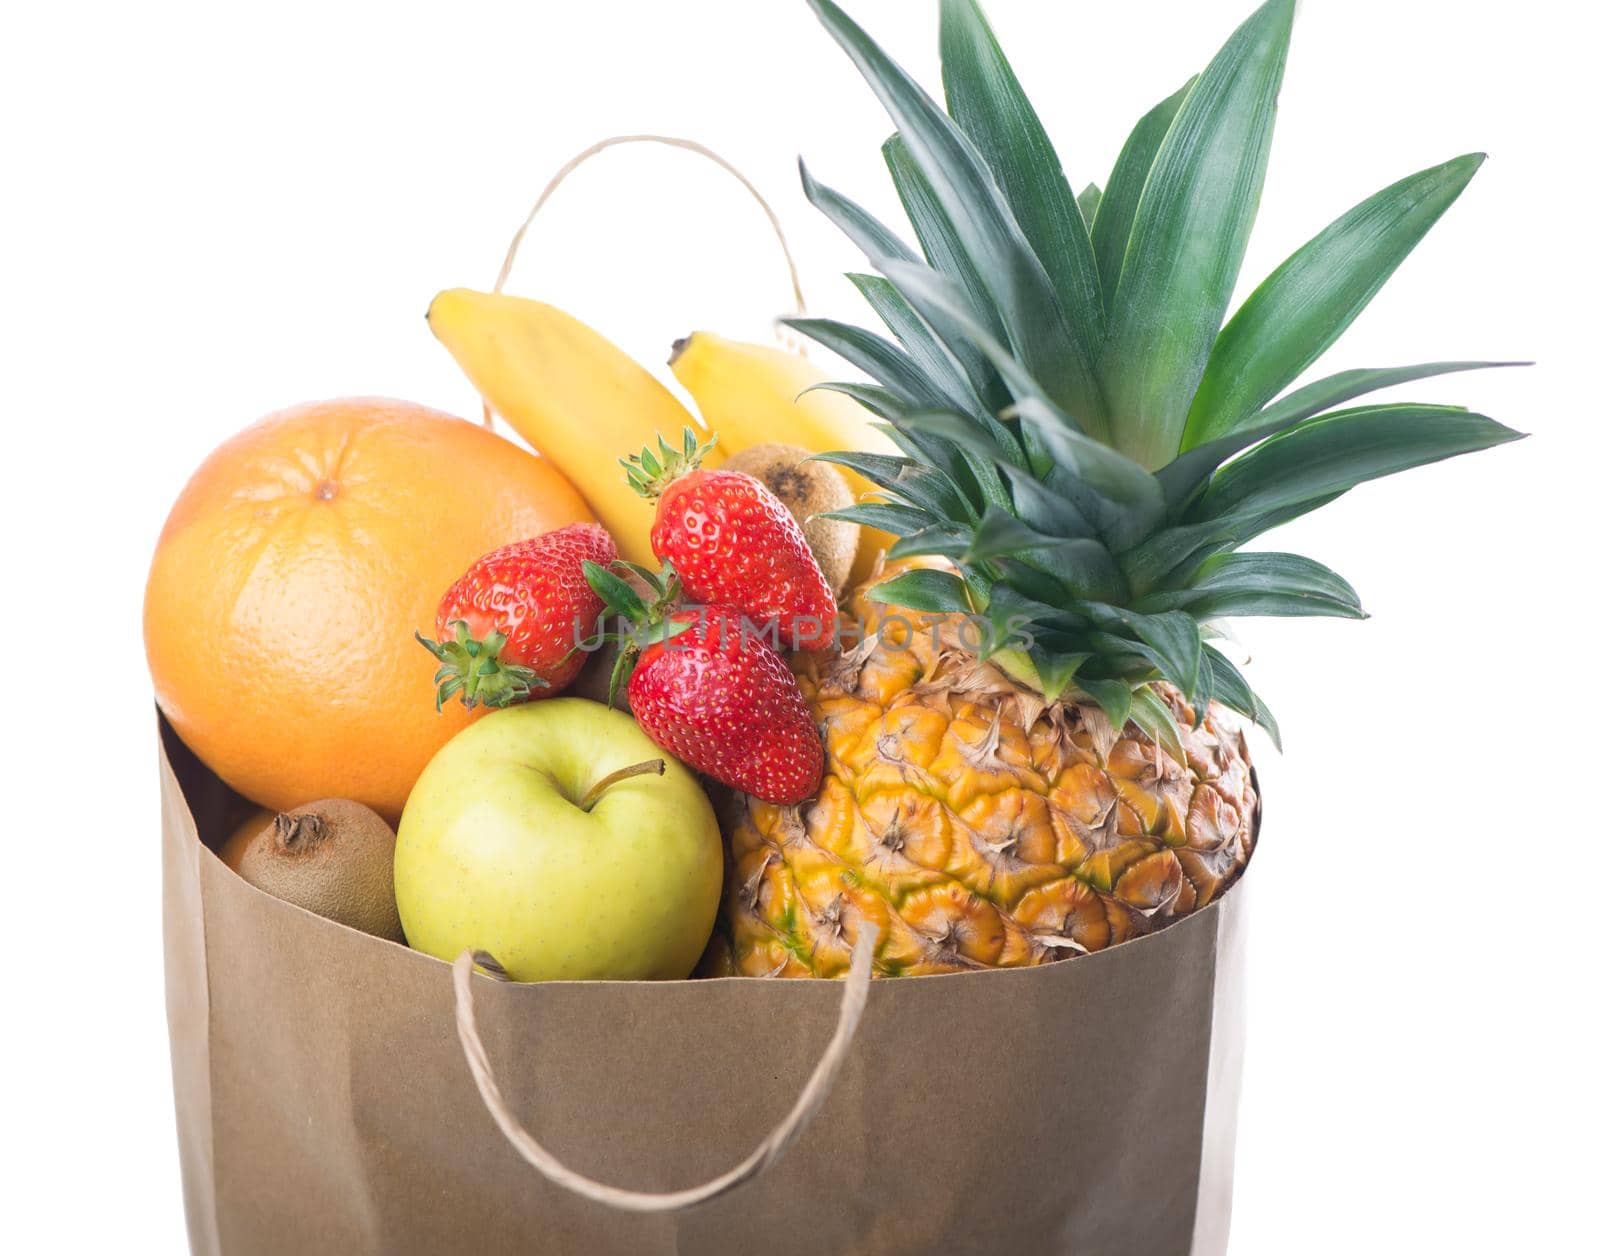 Fruits and vegetables in paper grocery bag isolated over white by aprilphoto